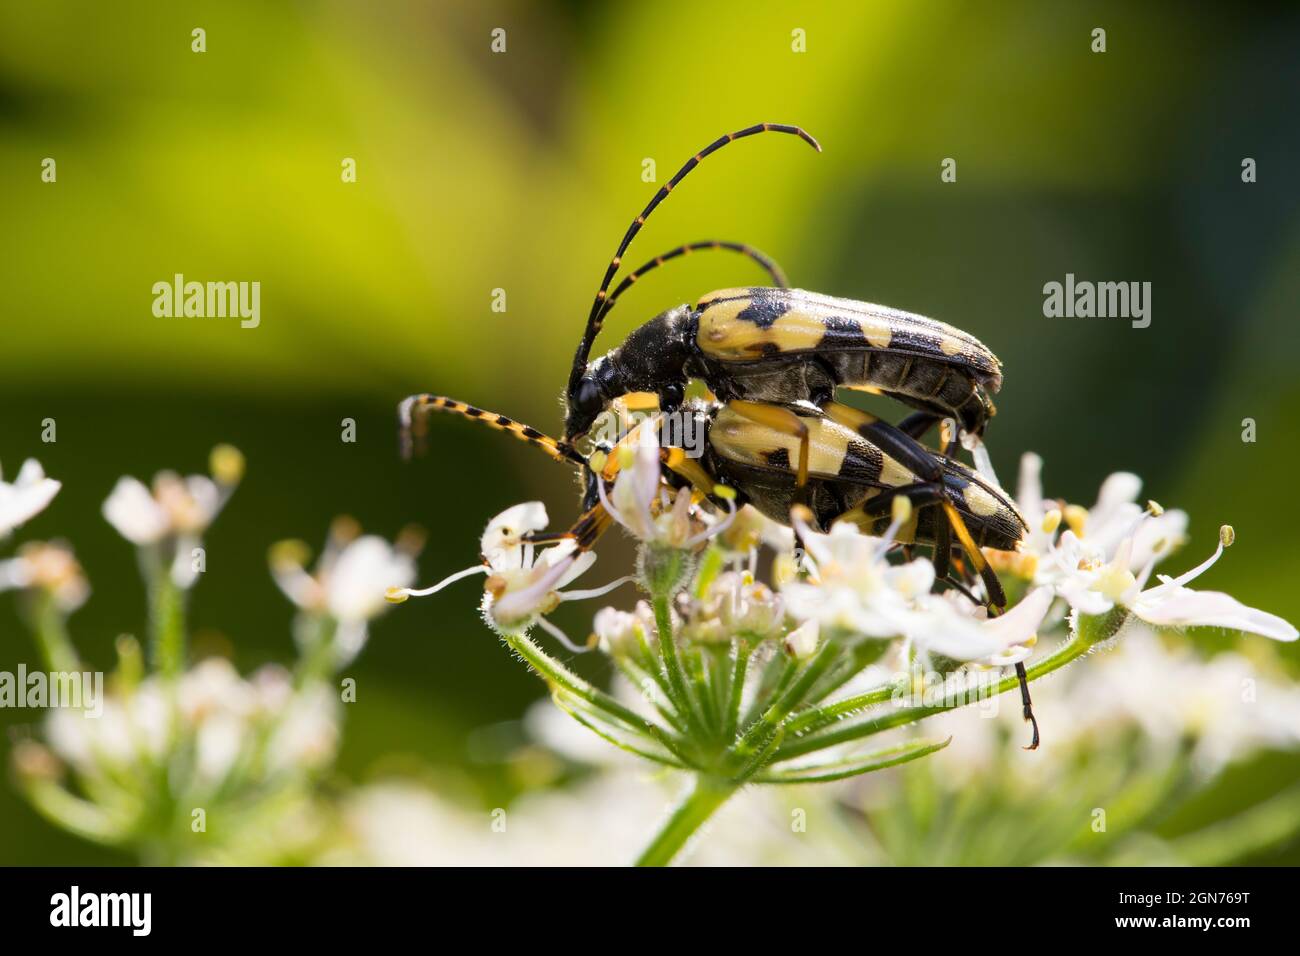 Spoted longhorn beetles (Rutpela maculata) adults mating on a hogweed flower. Powys, Wales. June. Stock Photo